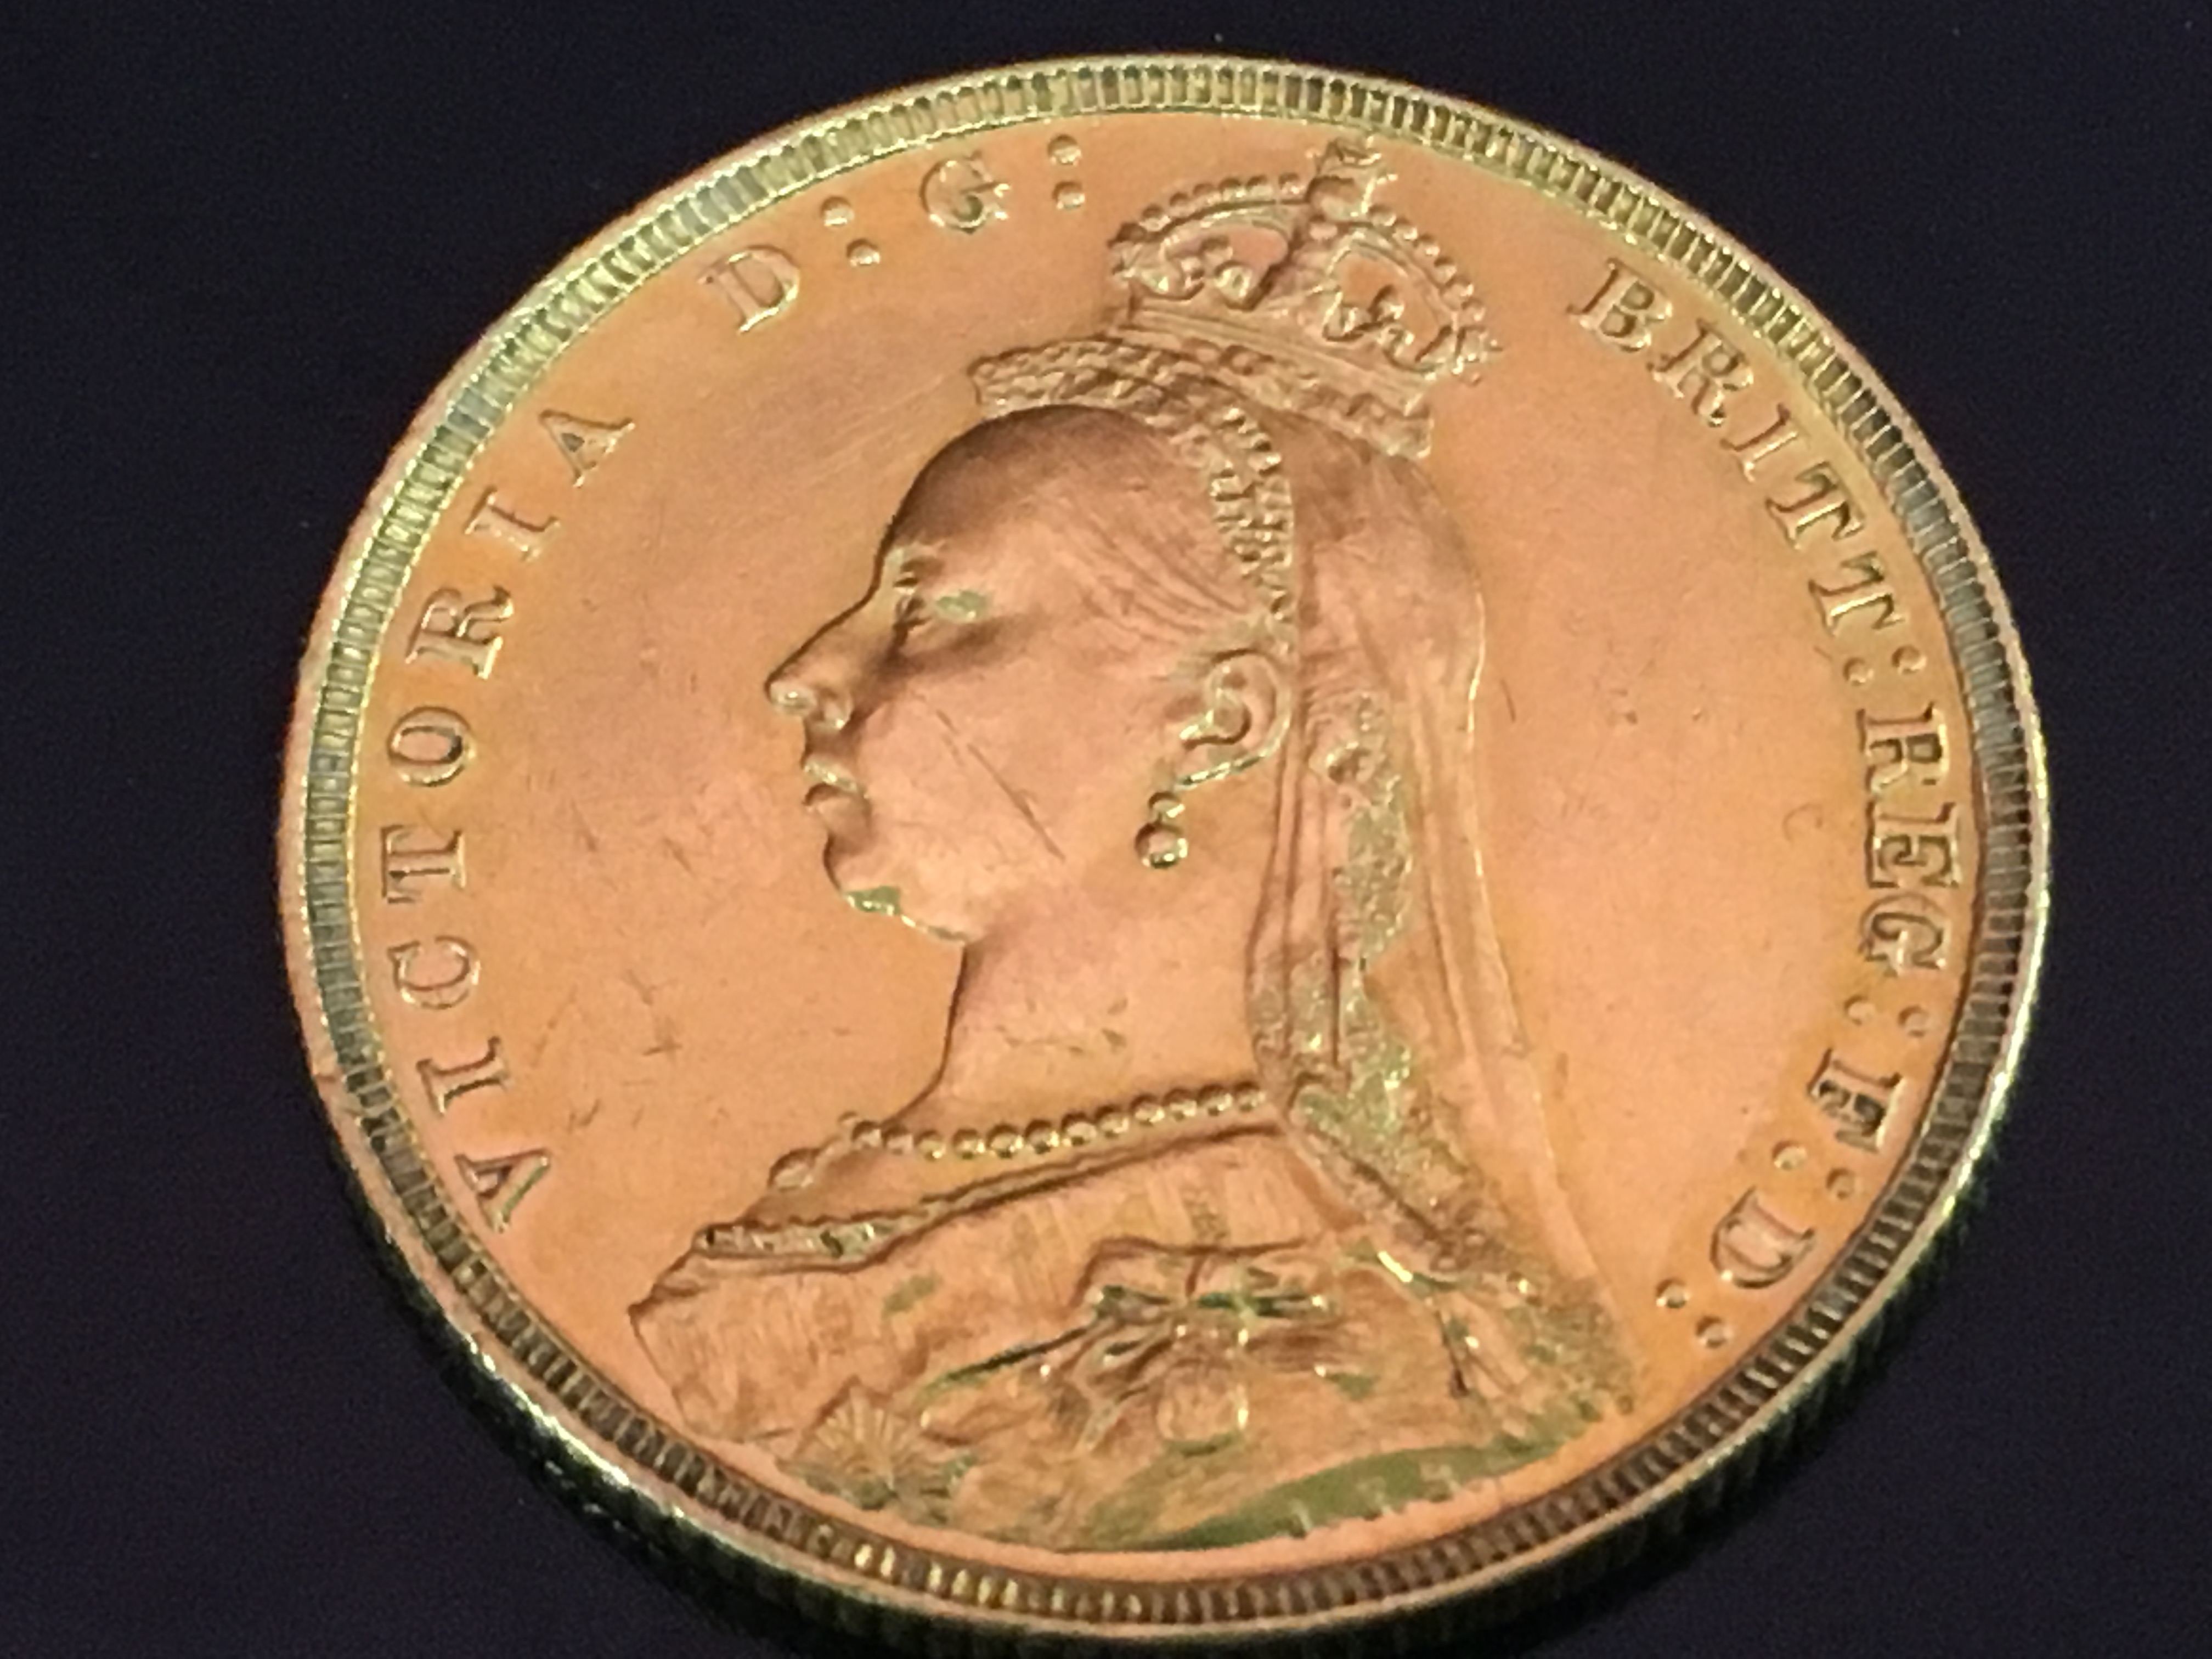 GOLD FULL SOVEREIGN COIN, - Image 2 of 2